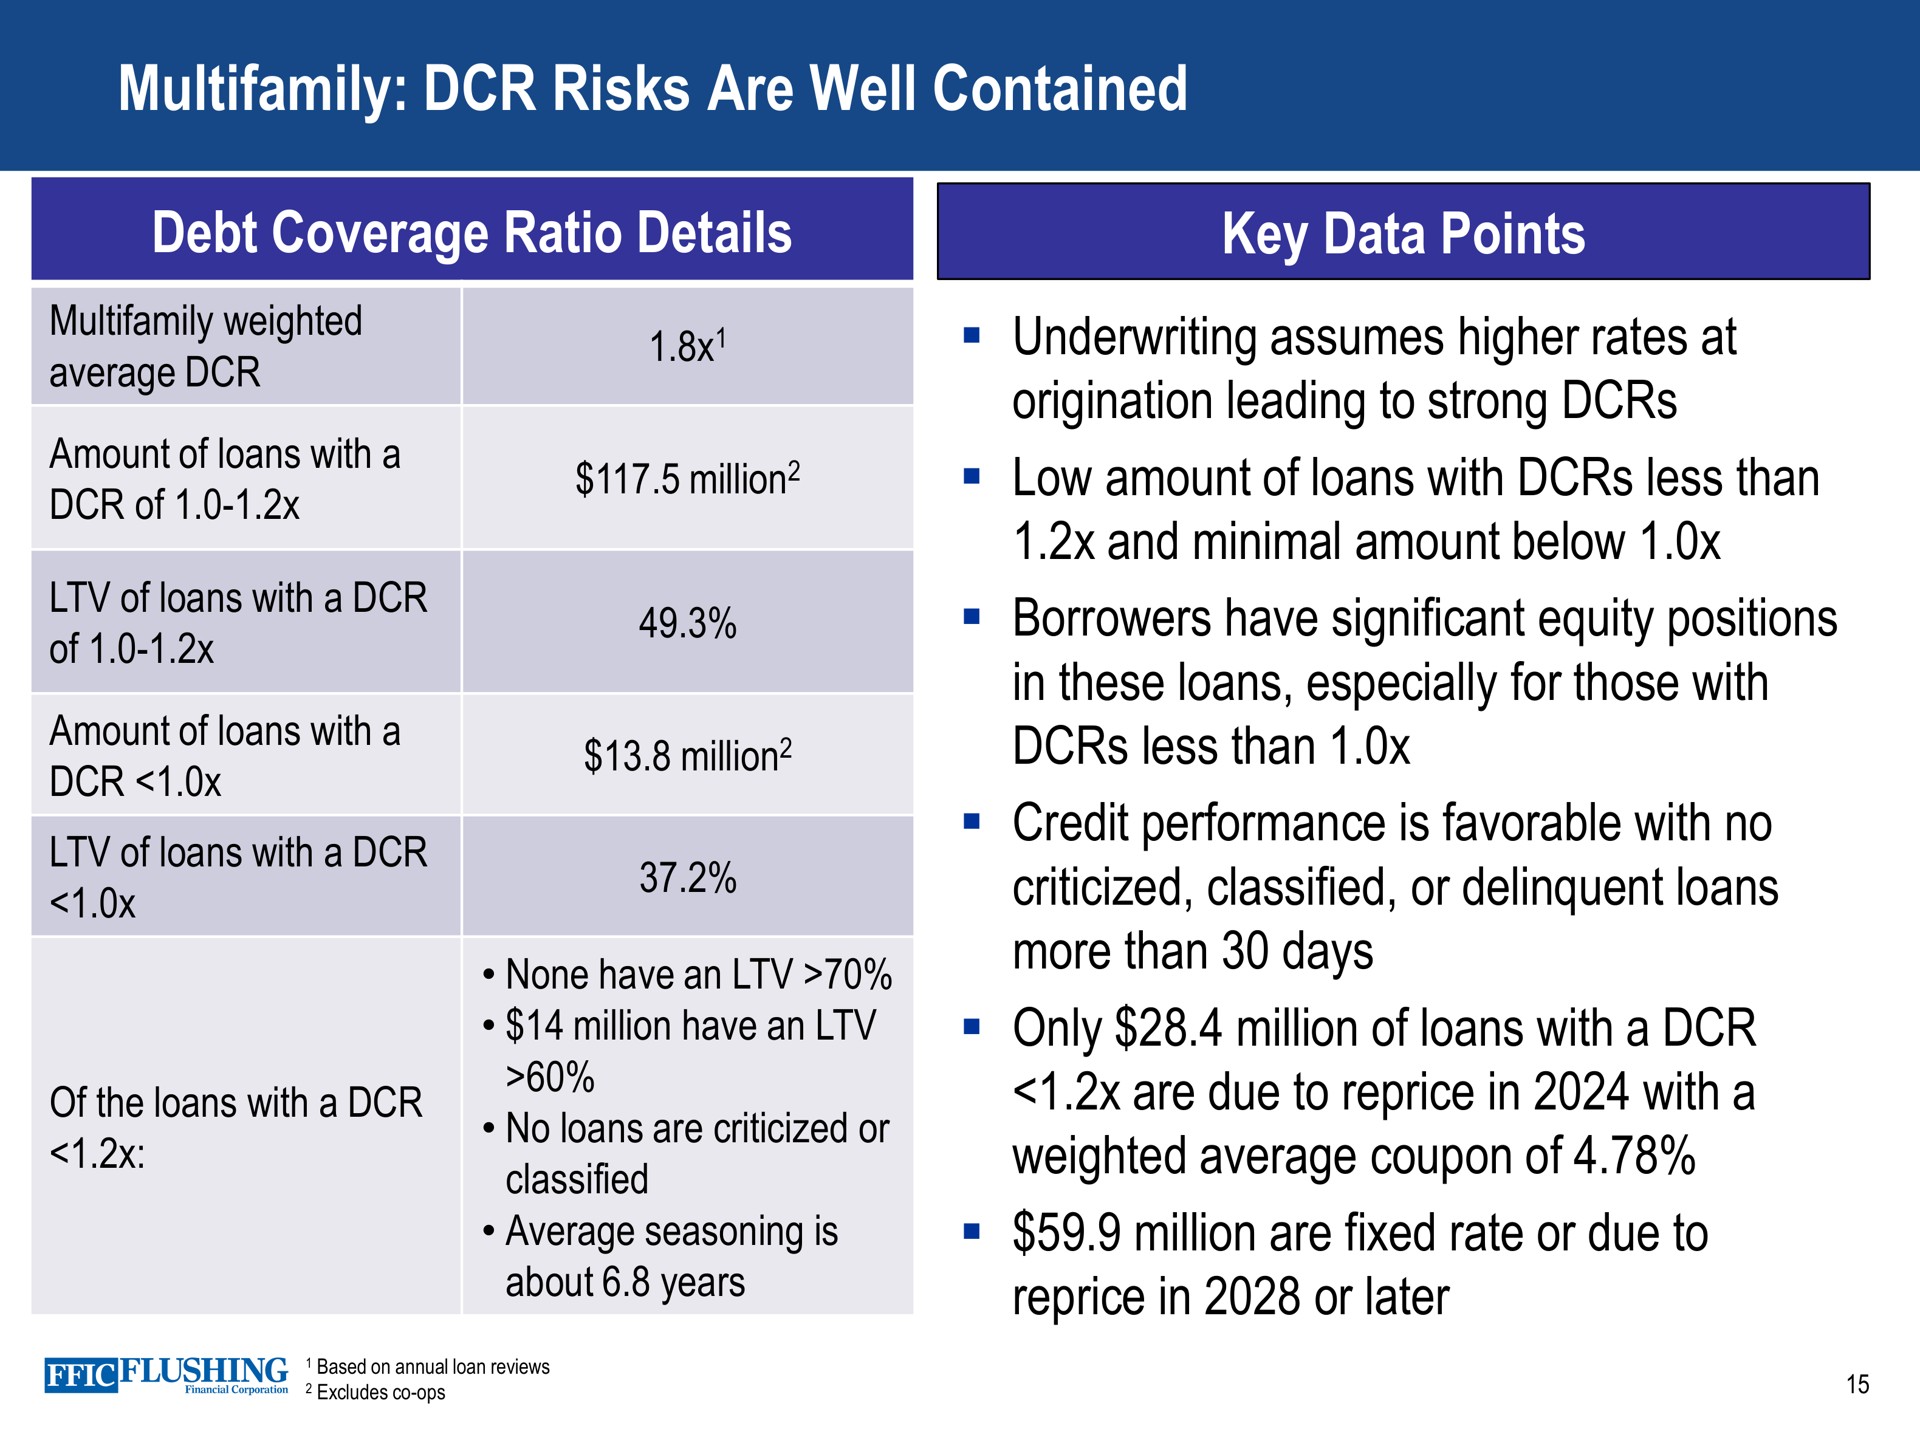 risks are well contained debt coverage ratio details key data points of of underwriting assumes higher rates at origination leading to strong borrowers have significant equity positions in these loans especially for those with less than credit performance is favorable with no criticized classified or delinquent loans more than days only million of loans with a due to reprice in with a weighted average coupon of million fixed rate or due to reprice in or later | Flushing Financial